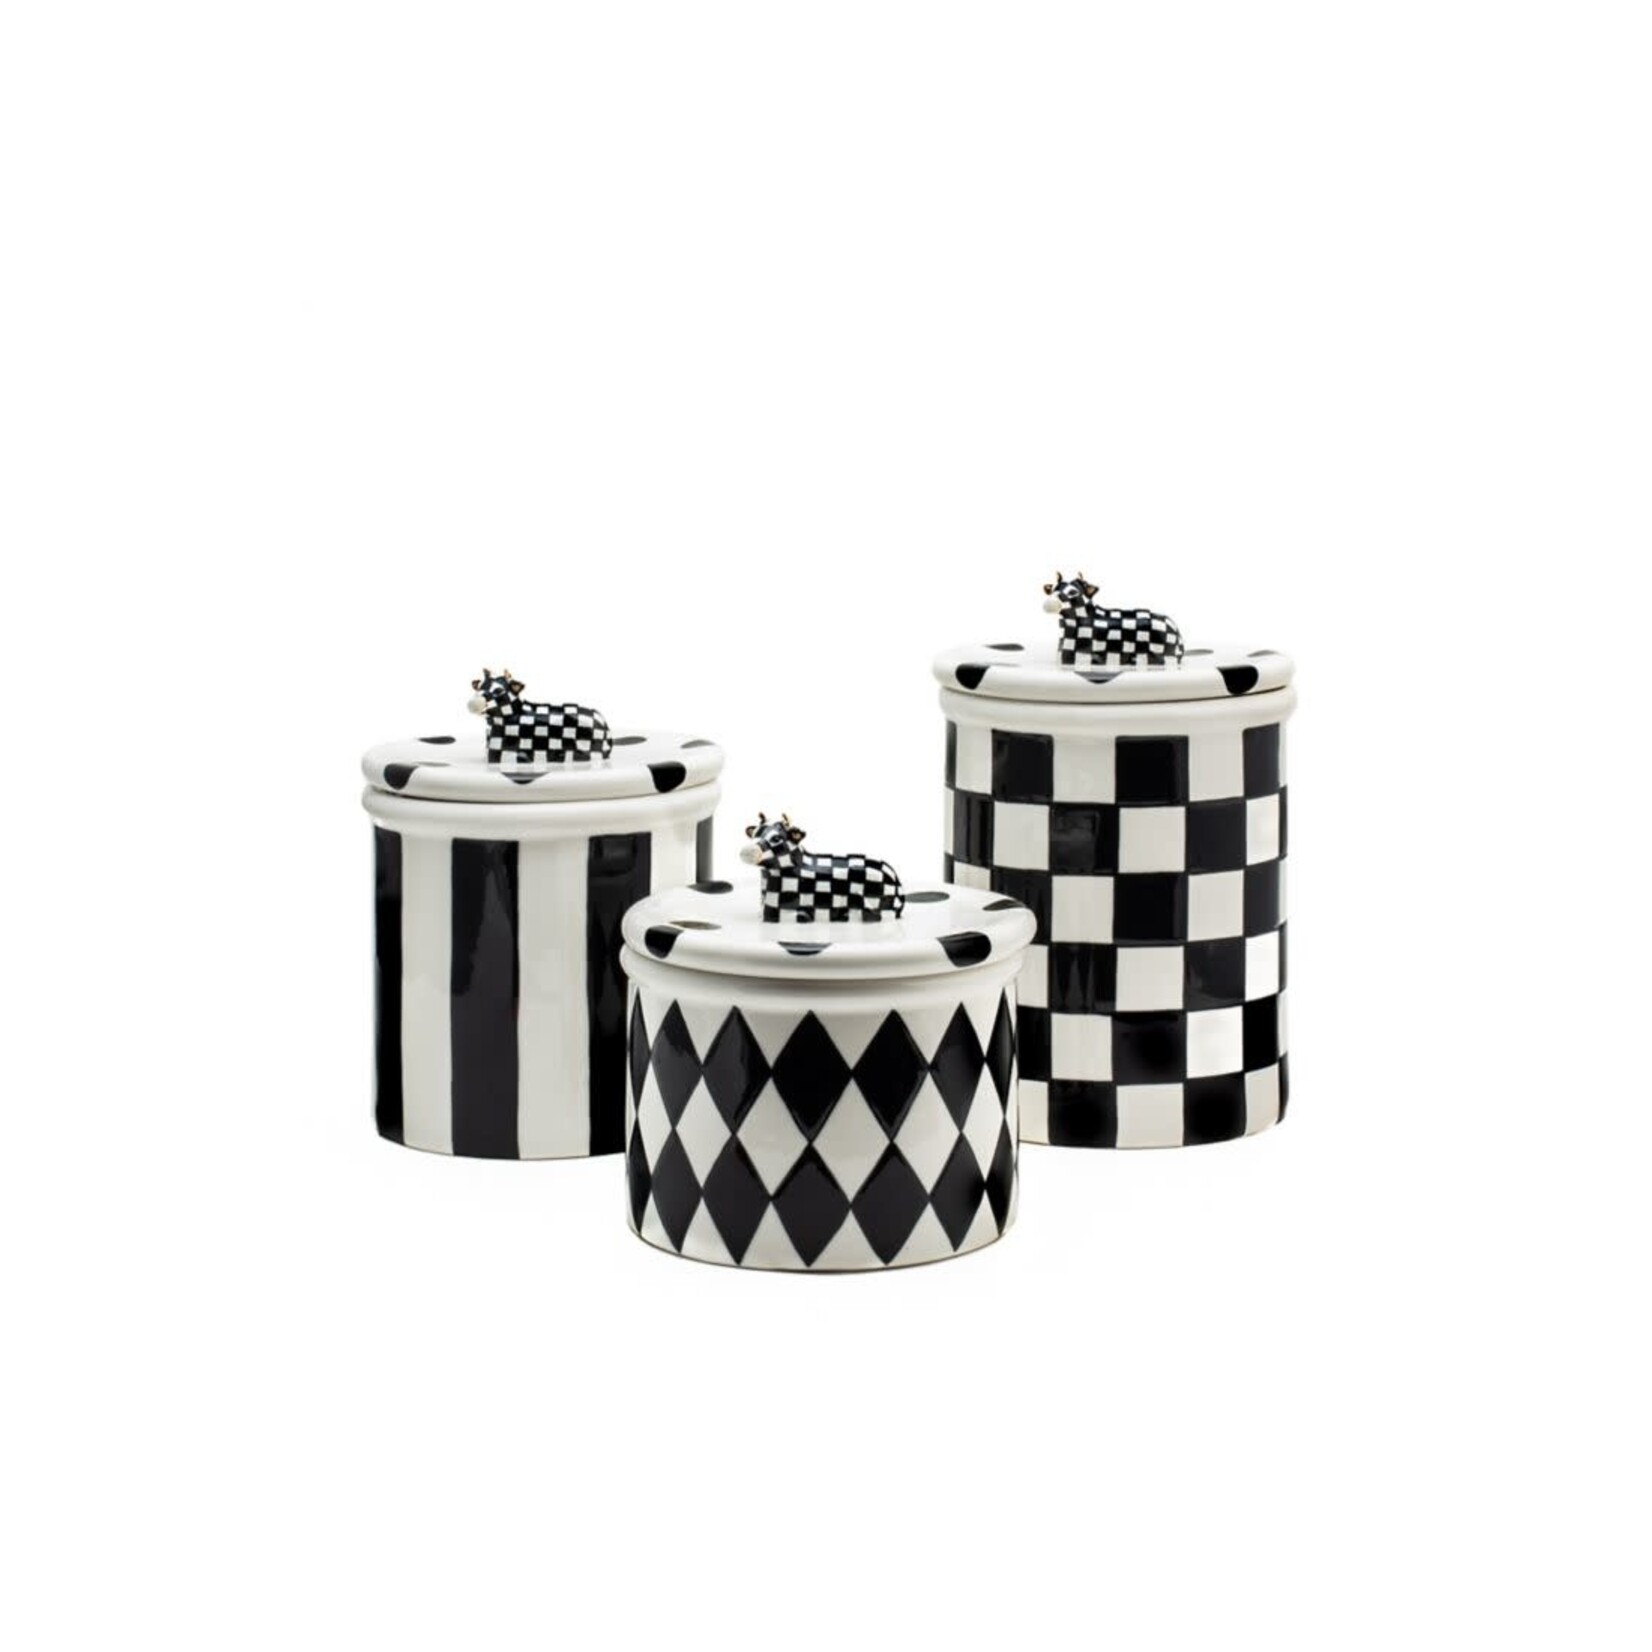 MacKenzie-Childs Cow Creamery Canisters - Set of 3